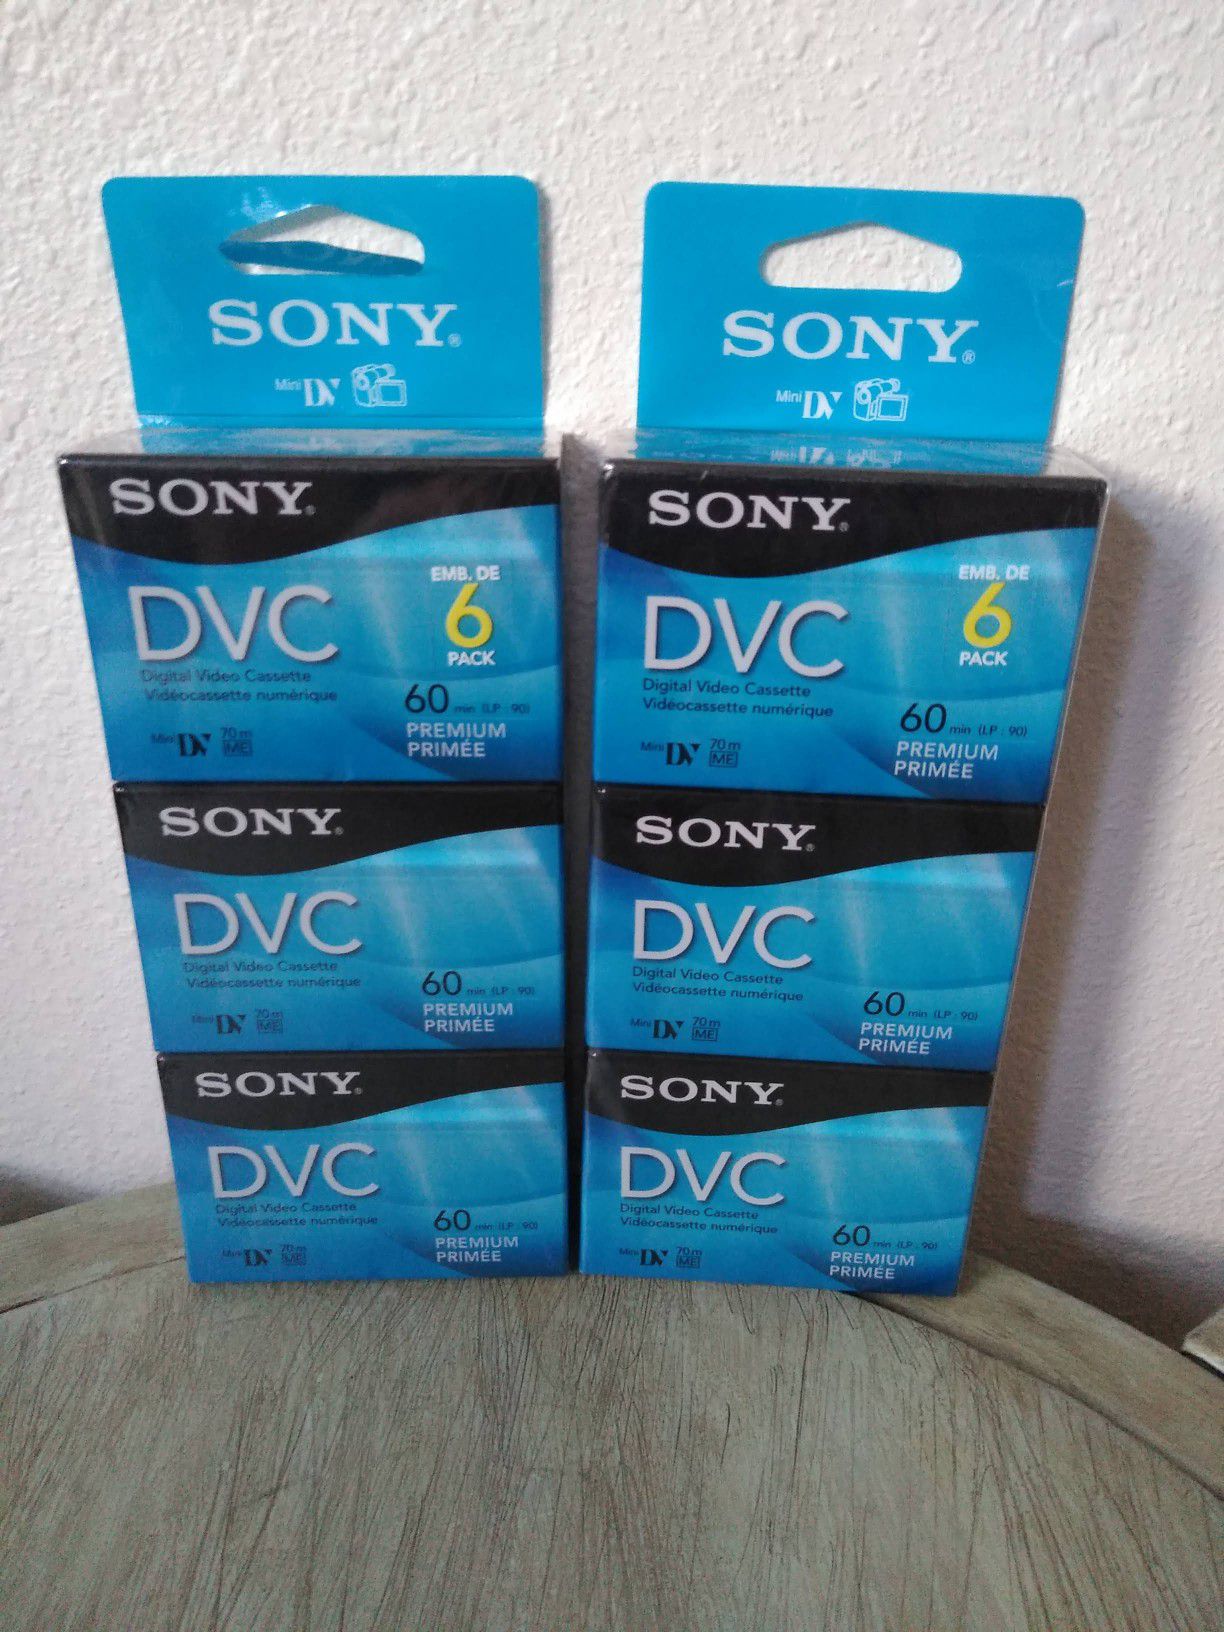 Sony 60 minute DVC 6 pack